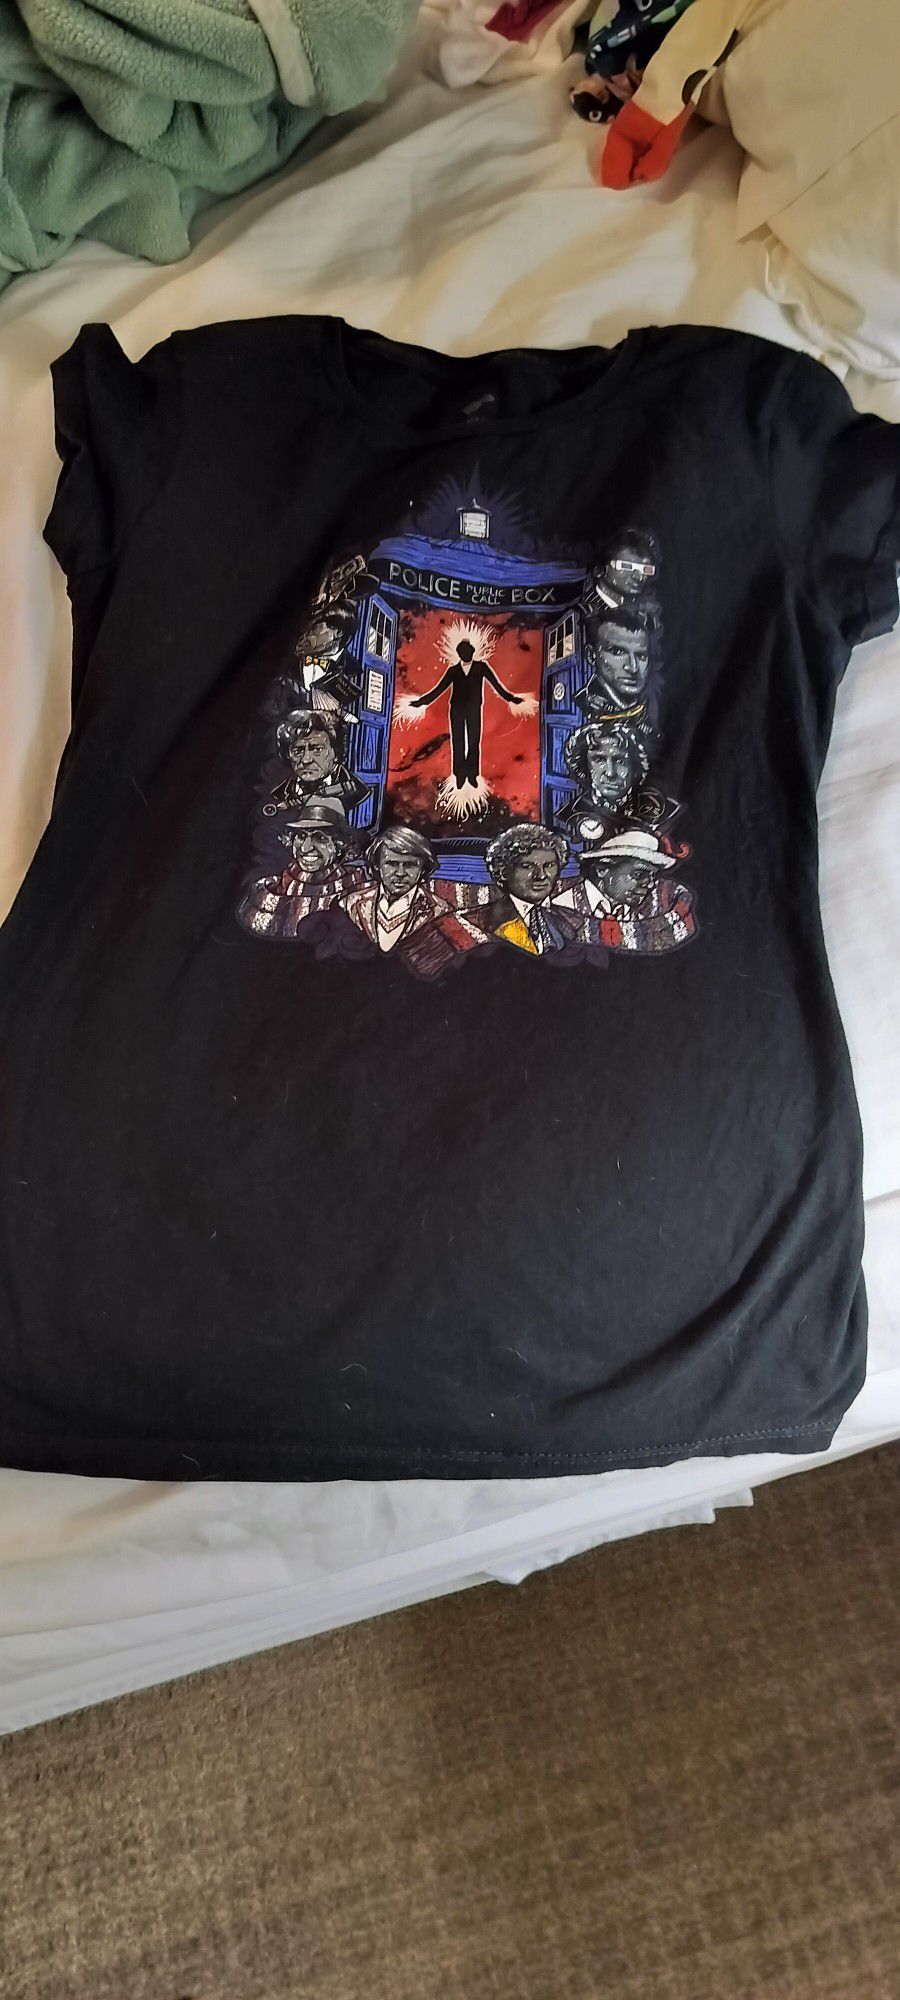 Tee Fury T-shirt Doctor Who Women's / Juniors Size Large